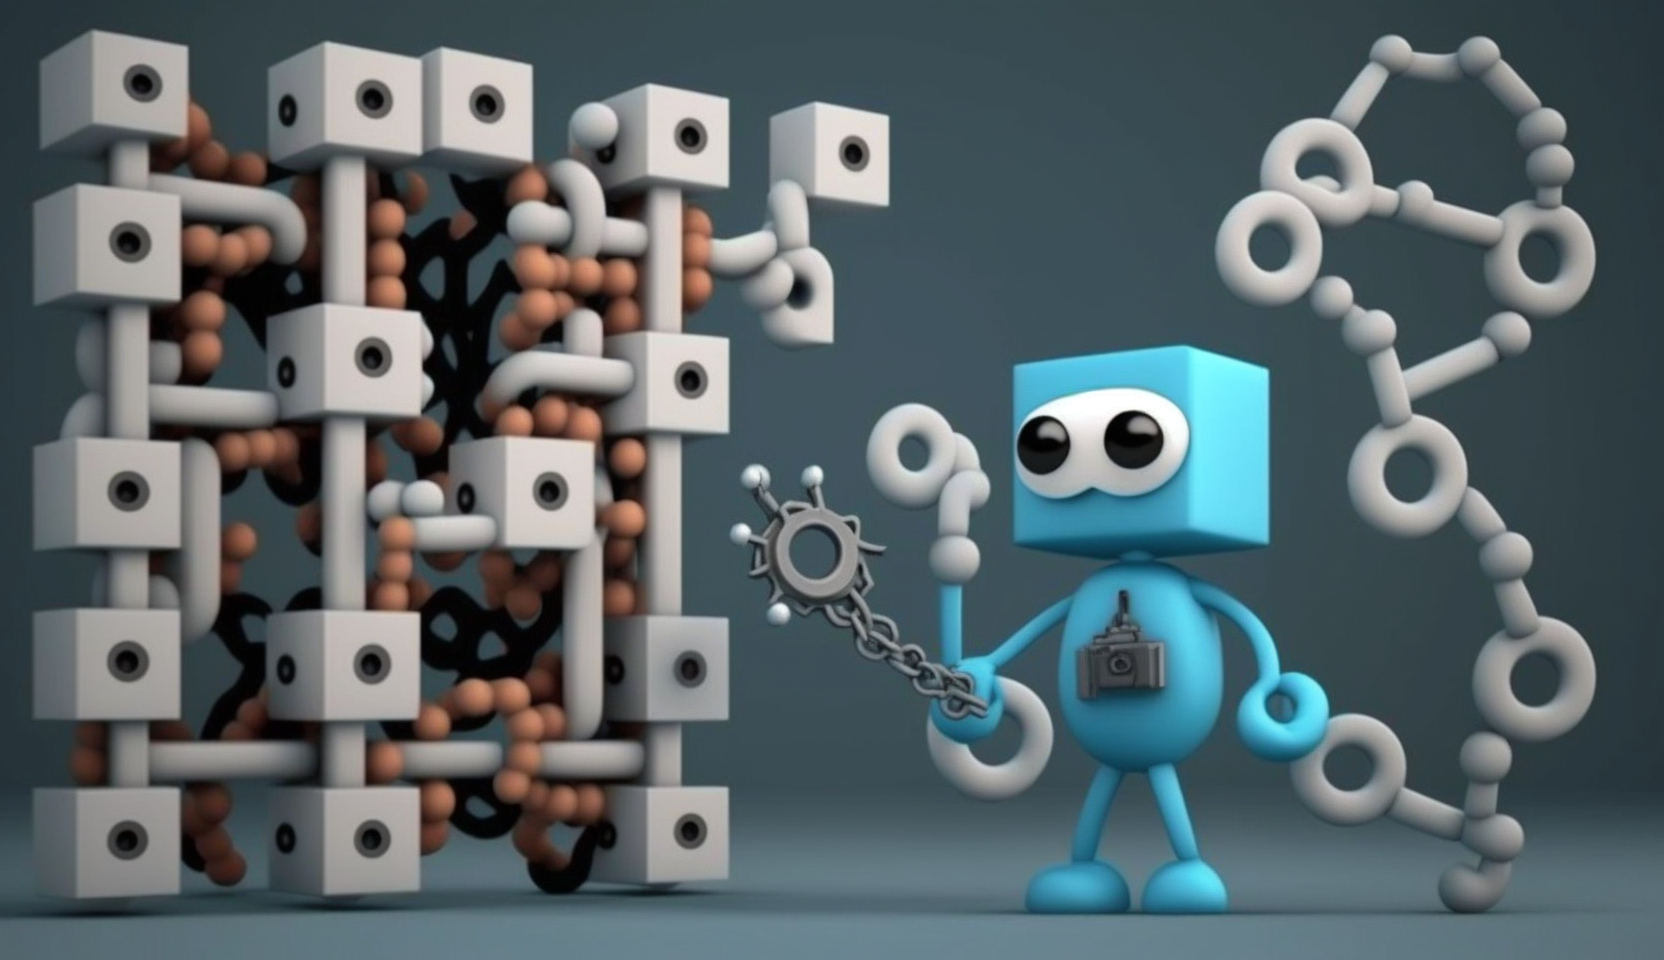 A cartoon character holding a key in one hand and a blockchain in the other, surrounded by a network of interconnected nodes and blocks.